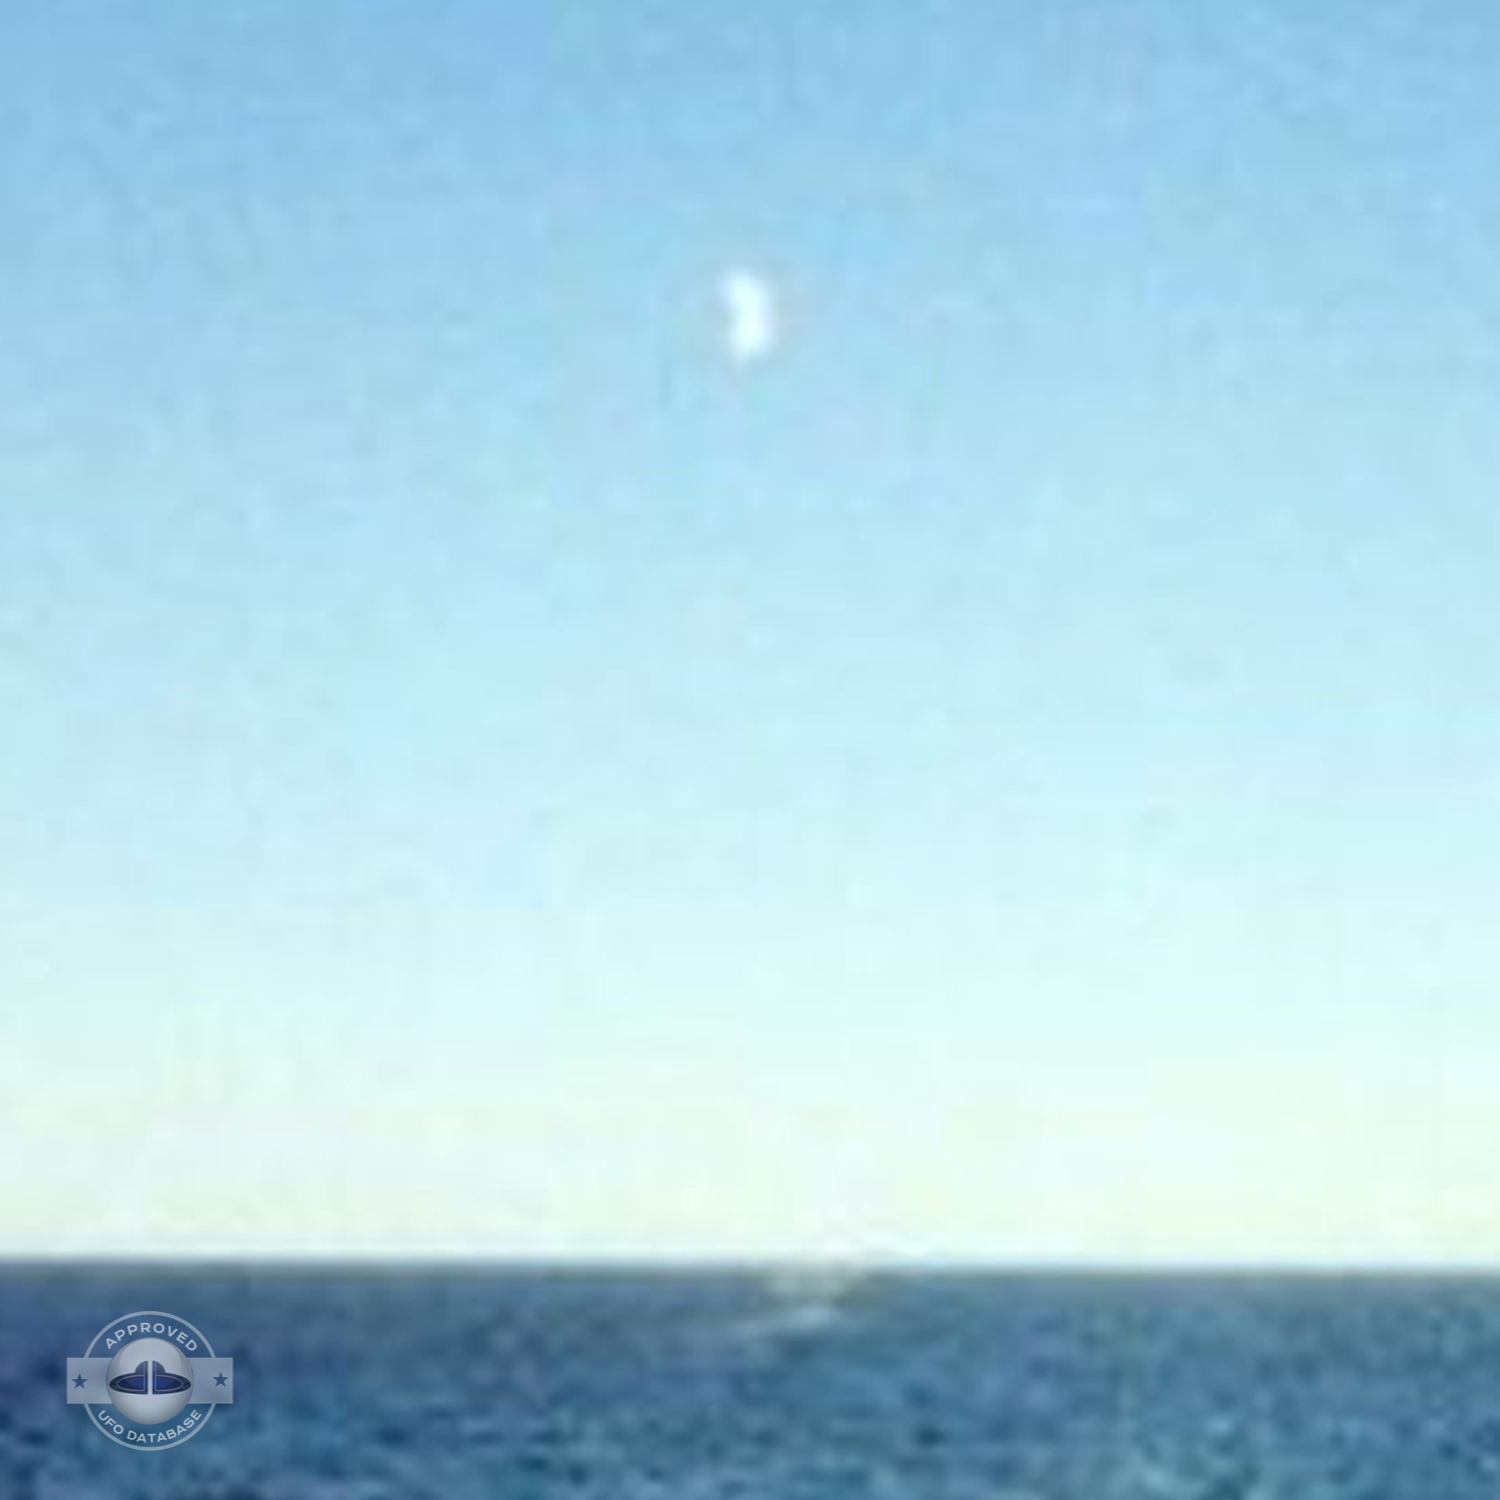 UFO flying over dark blue water near the shore of Lake Michigan USA UFO Picture #97-3